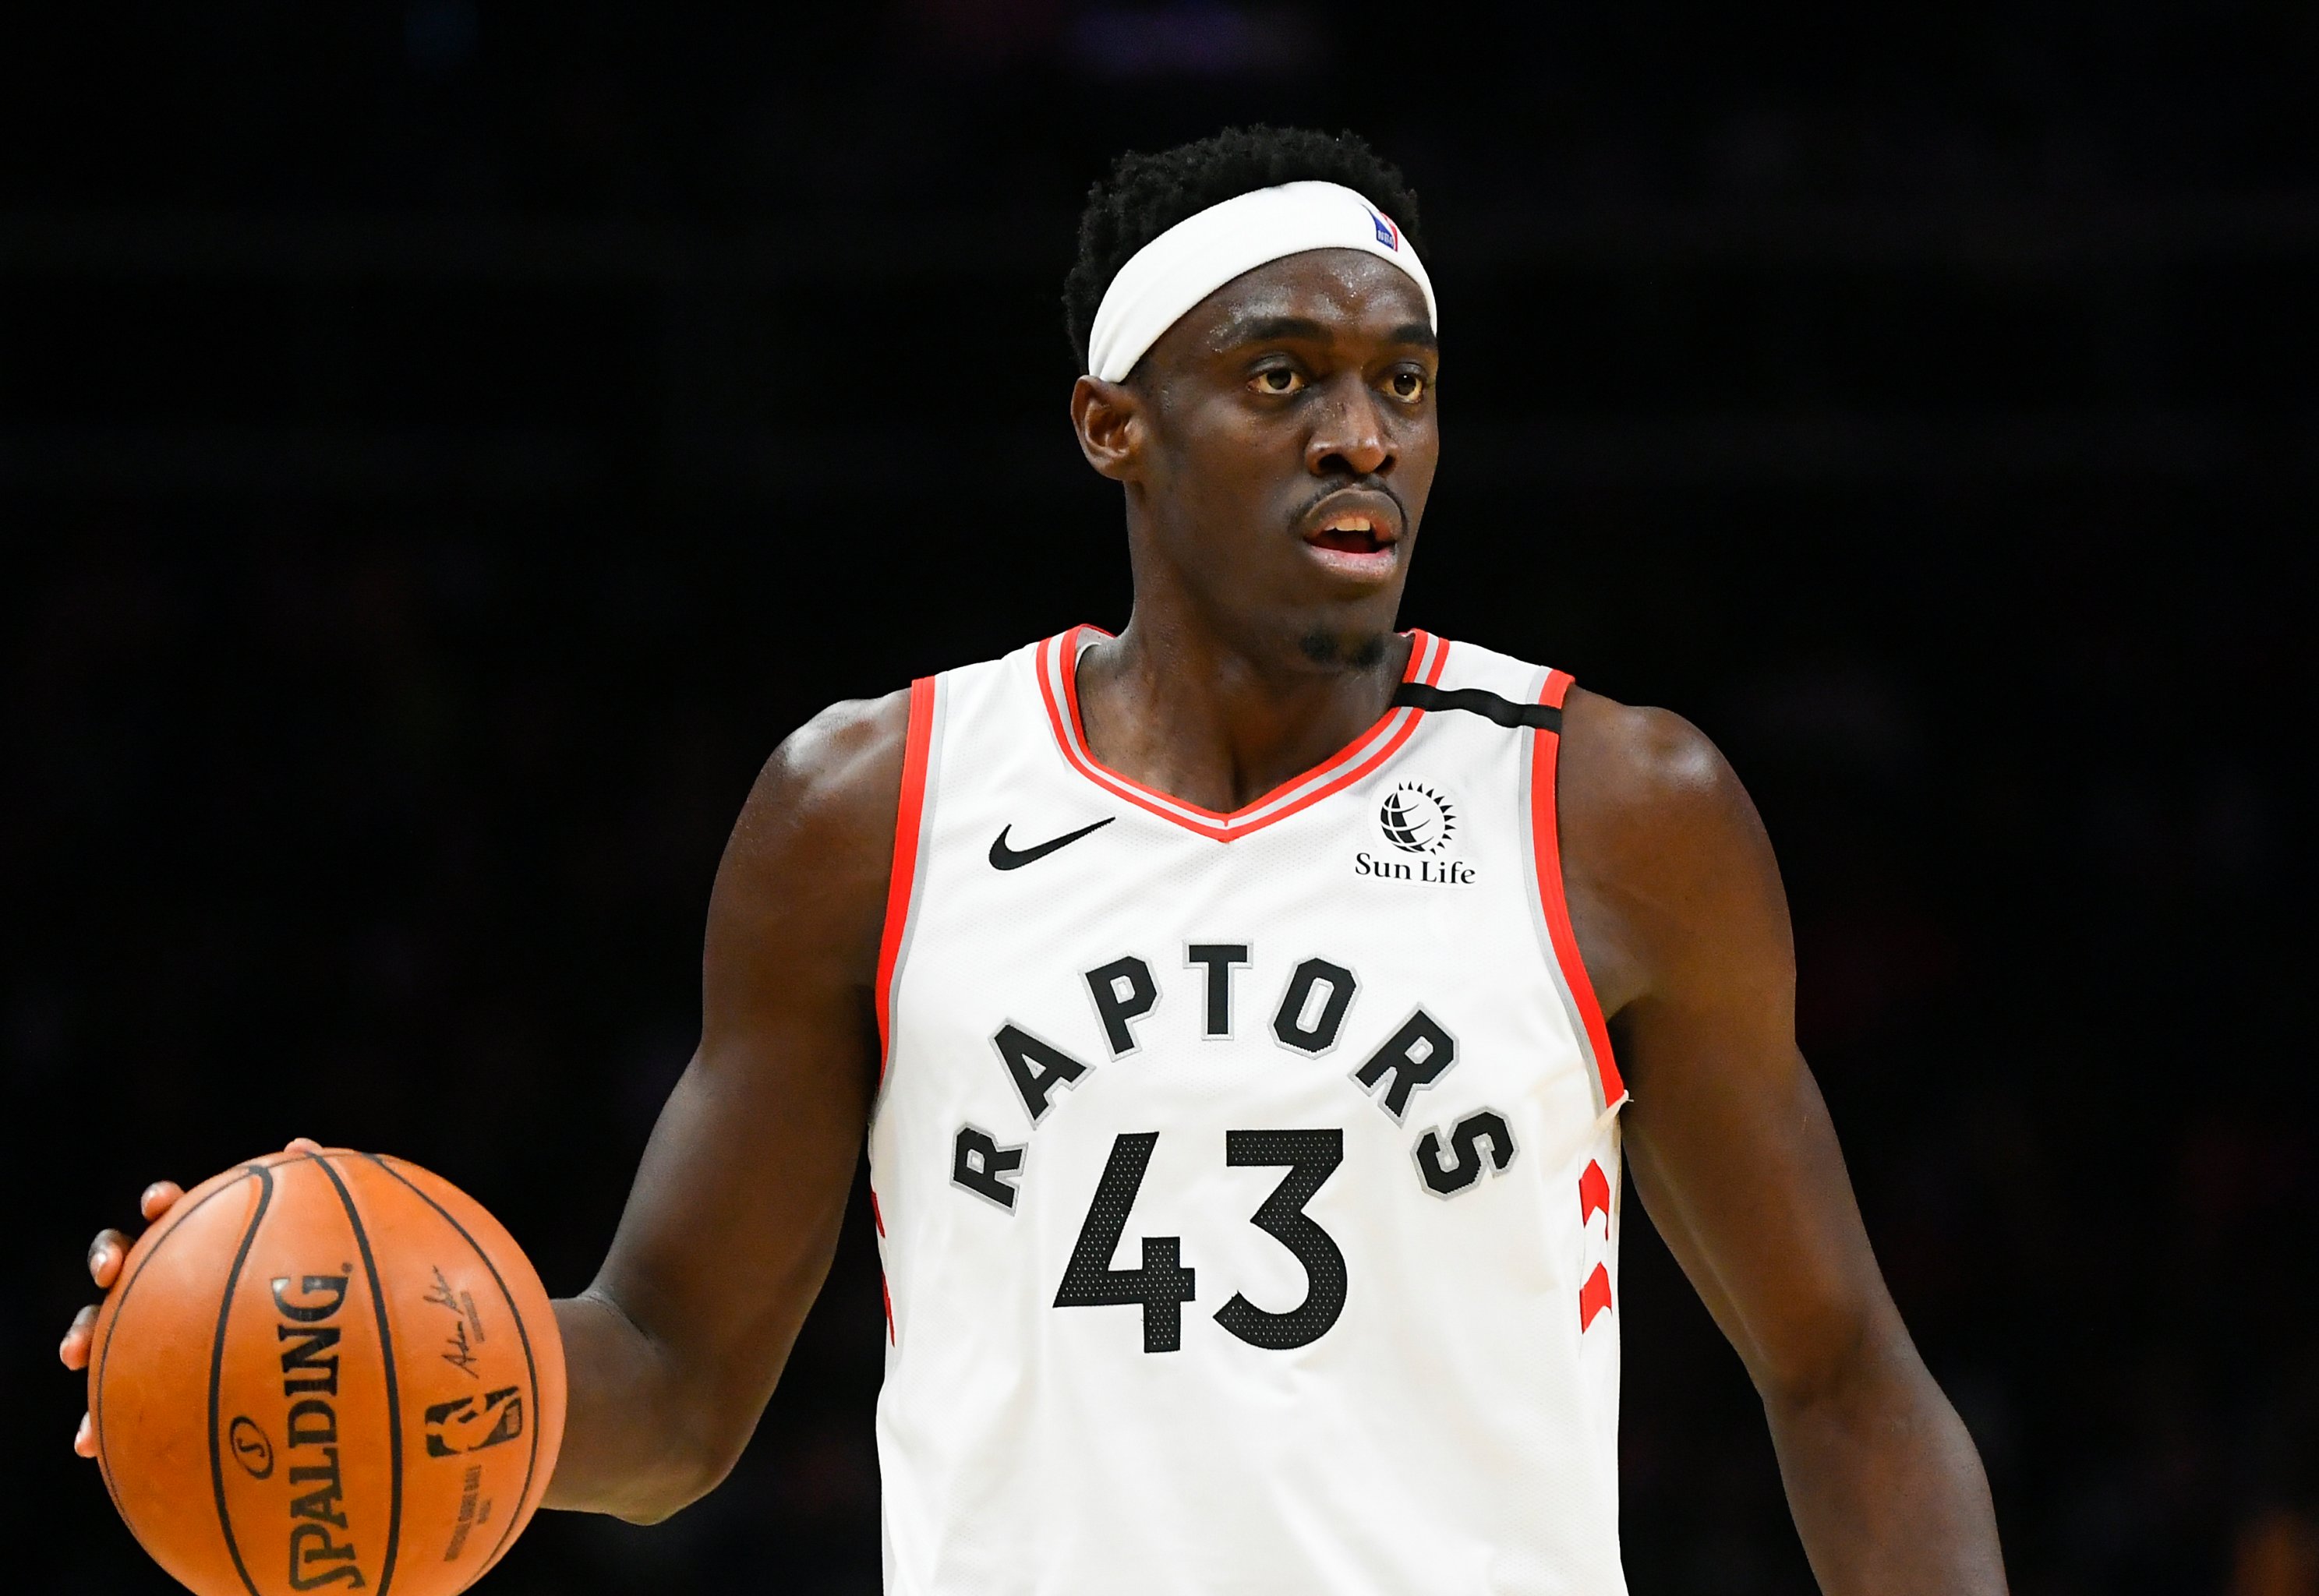 New Look Pacers: All-Star Forward Pascal Siakam Traded to the Indiana Pacers, by Will Lyons, The Lyons Den